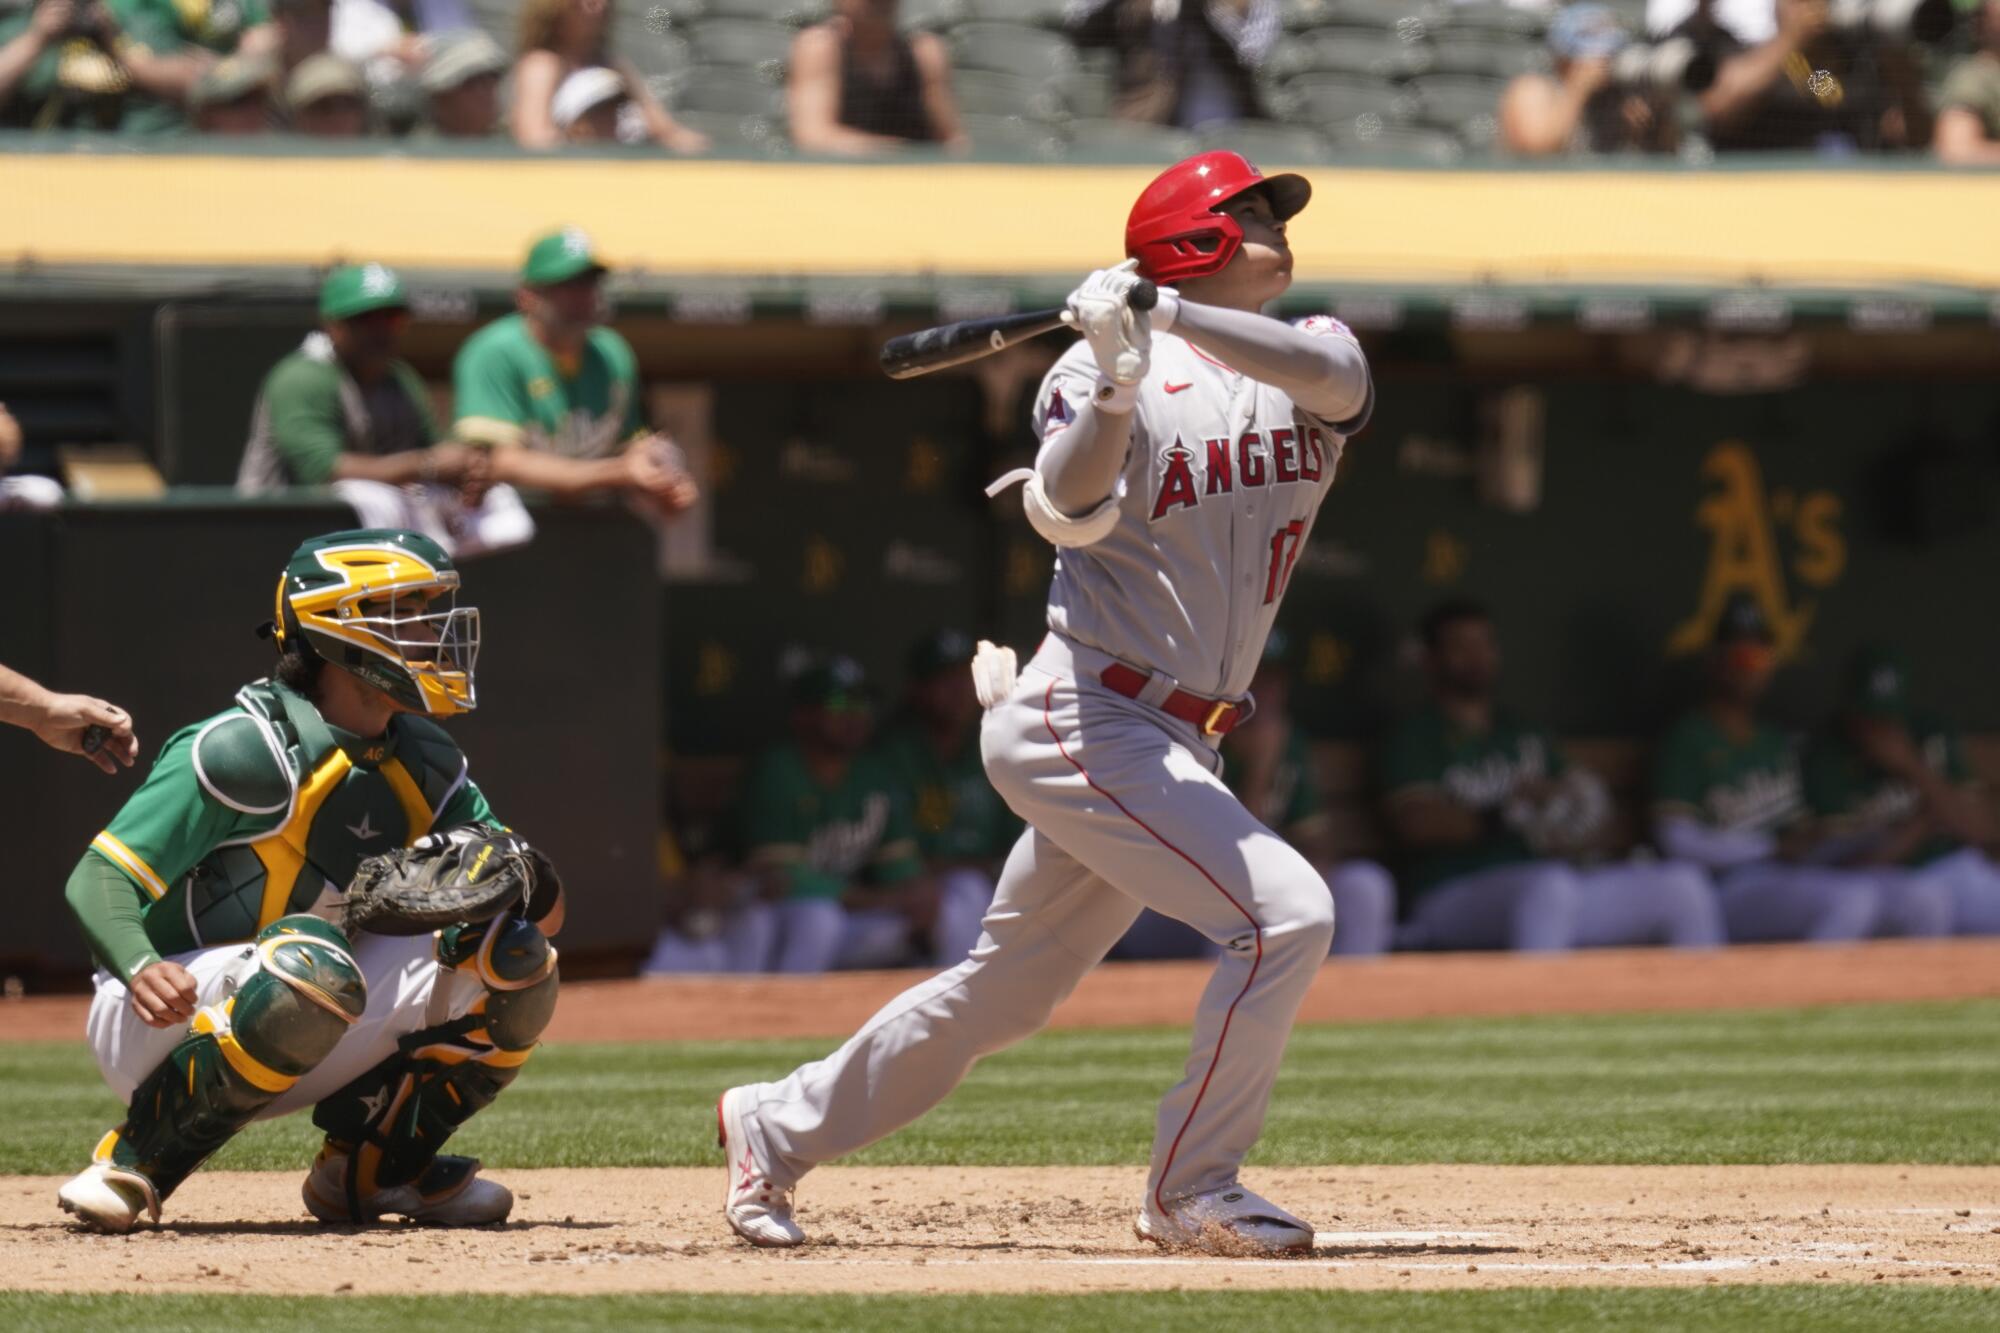 Angels designated hitter Shohei Ohtani hits a home run during the second inning against the Oakland Athletics.